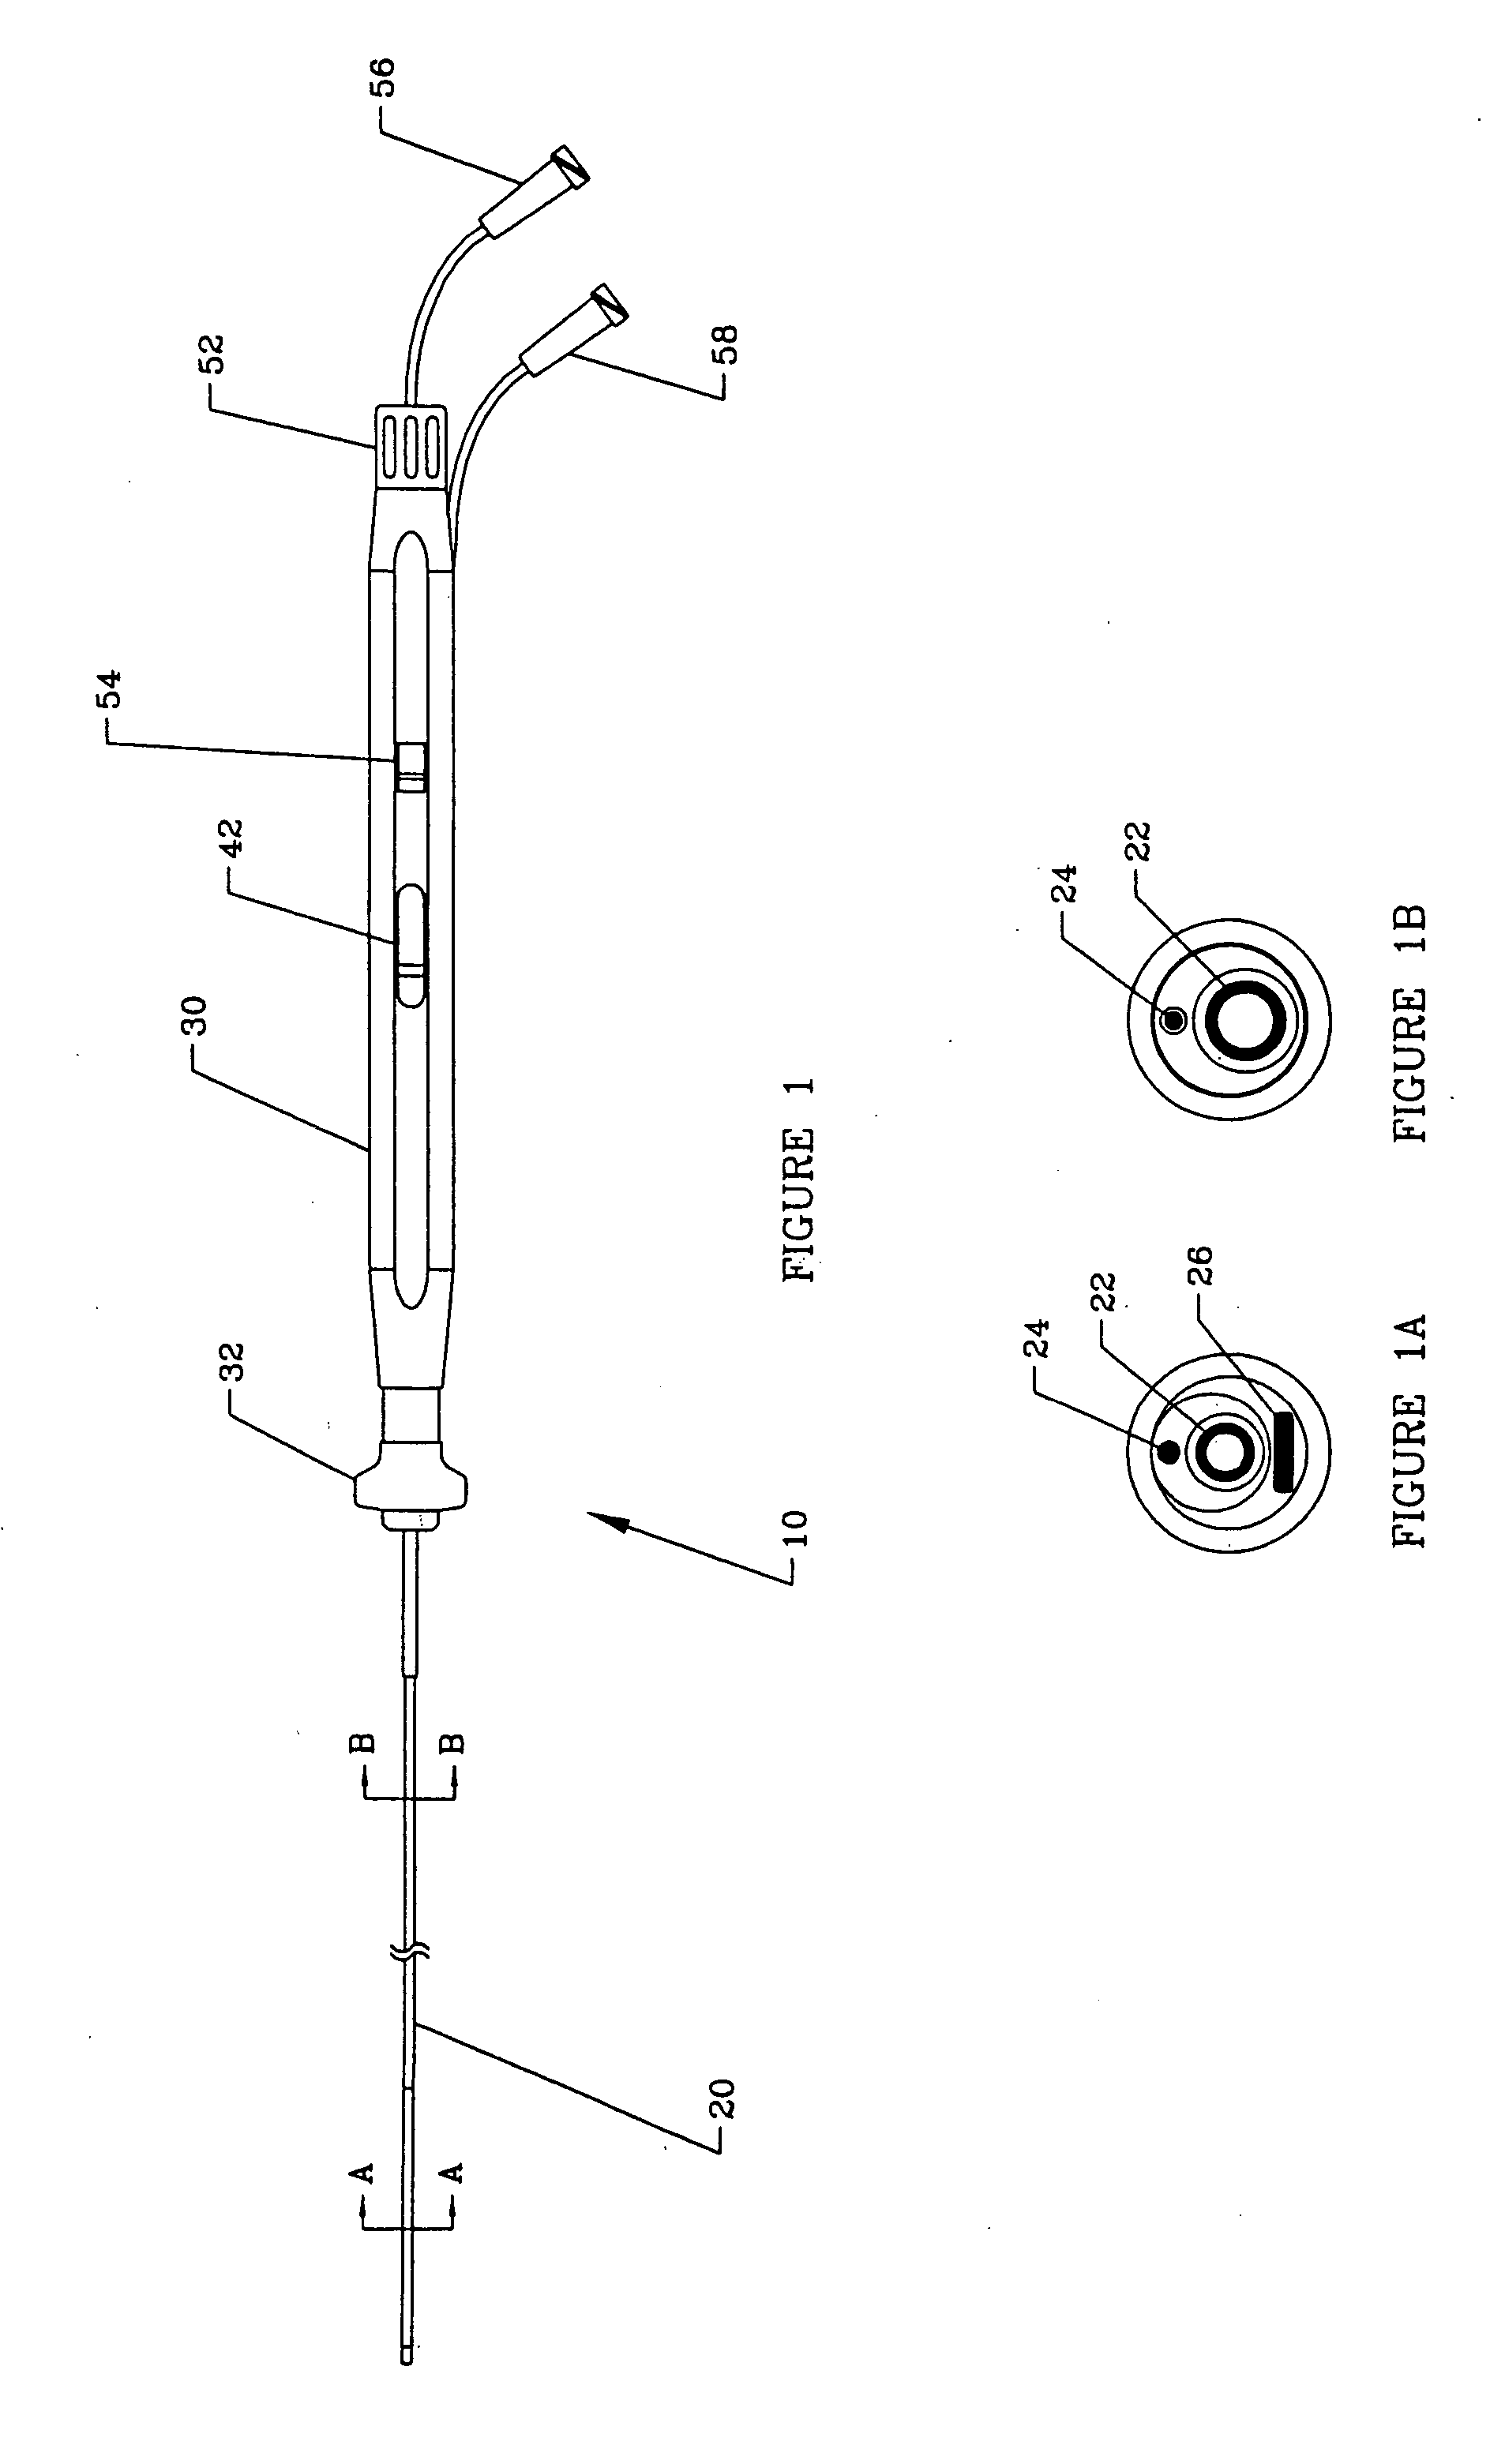 Deflectable microimplant delivery system